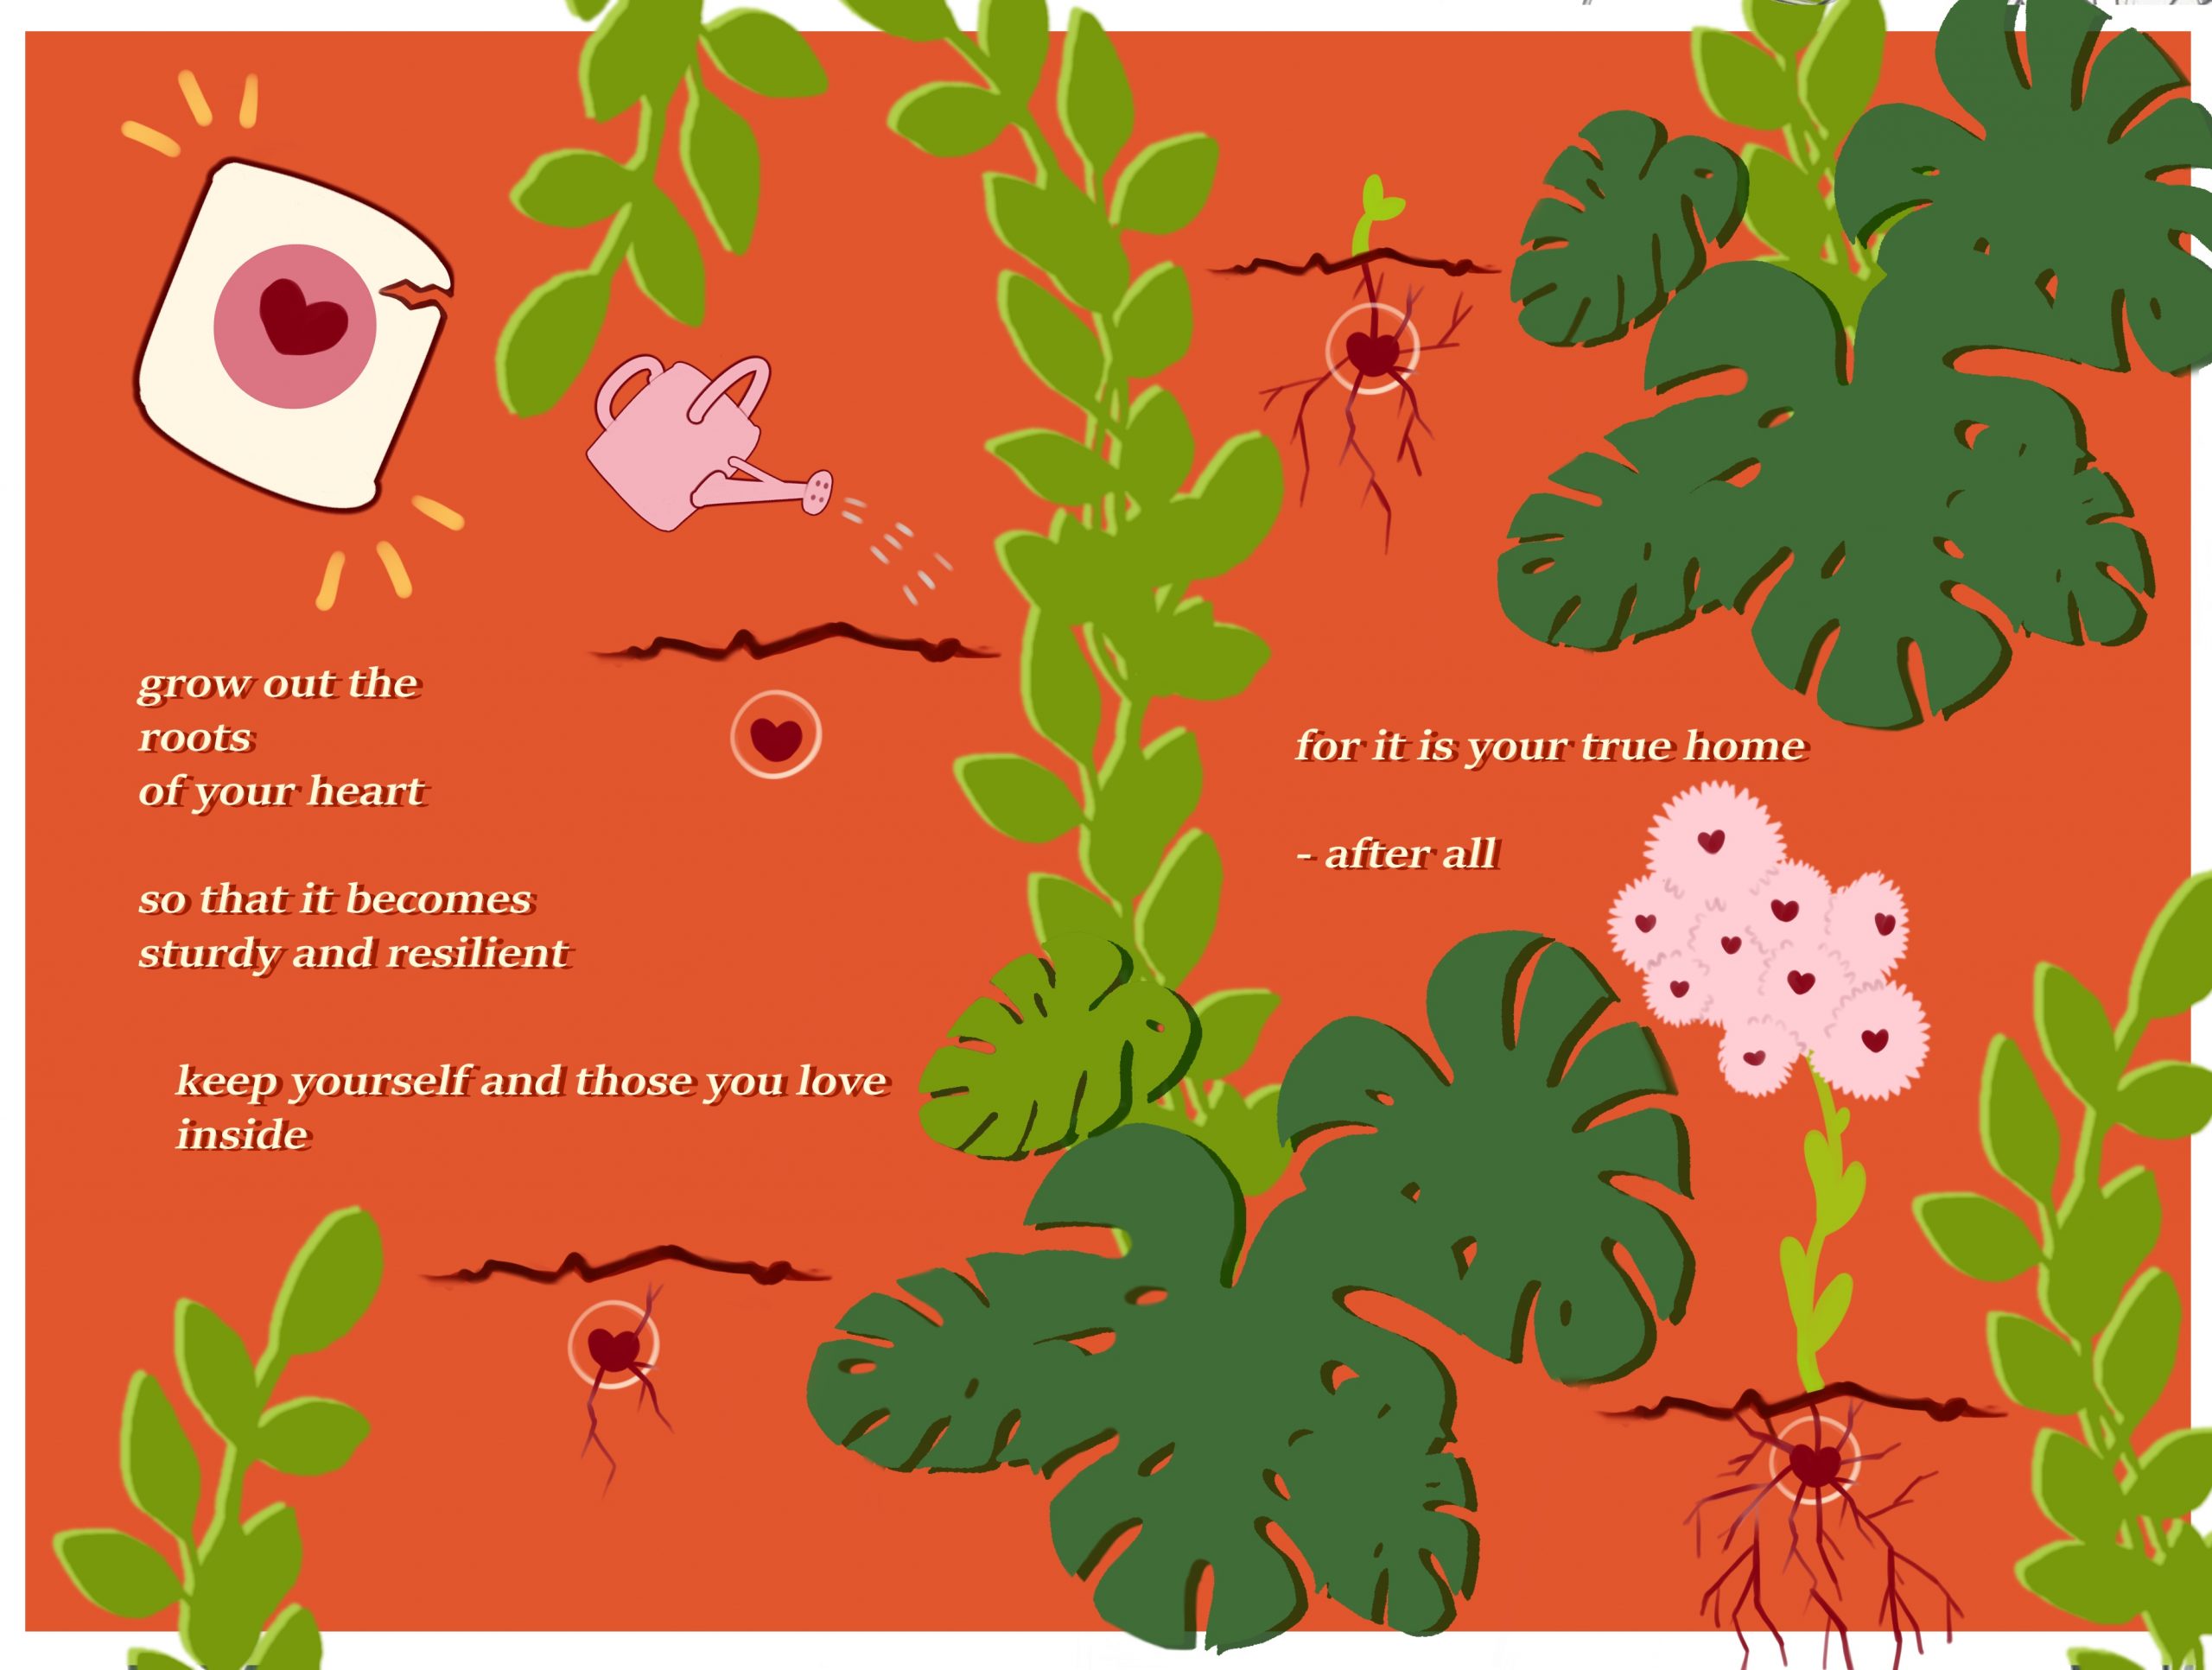 grow out the roots of your heart so that is becomes sturdy and resilient. keep yourself and those who you love inside, for it is your true home after all. deep orange background cover in illustrated luscious green leaves and roots being watered by a pink watering can